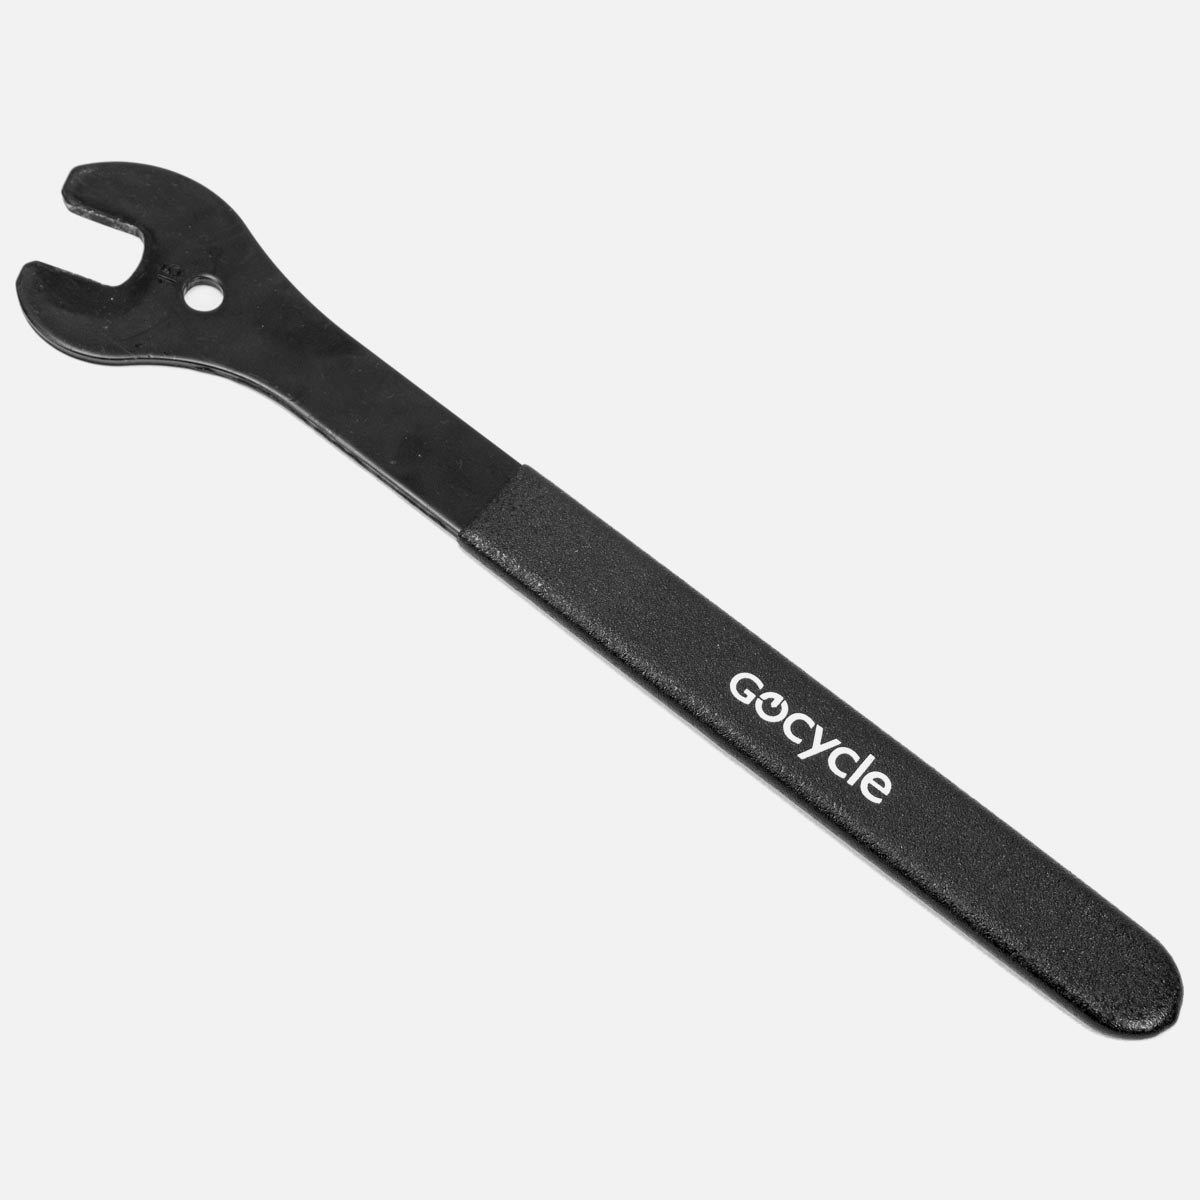 Thin 15mm Pedal Spanner